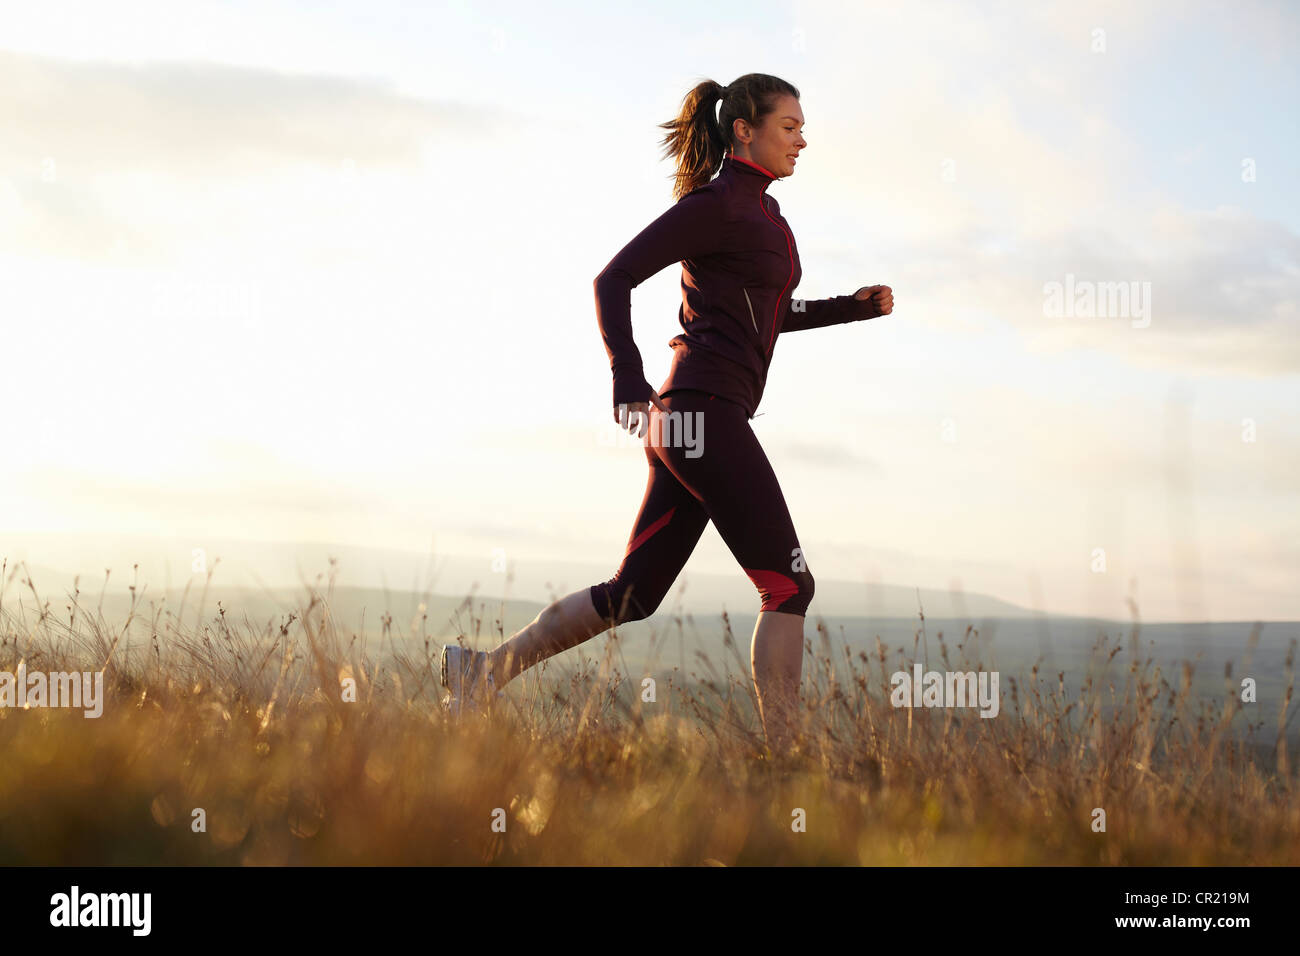 Woman running in rural field Stock Photo